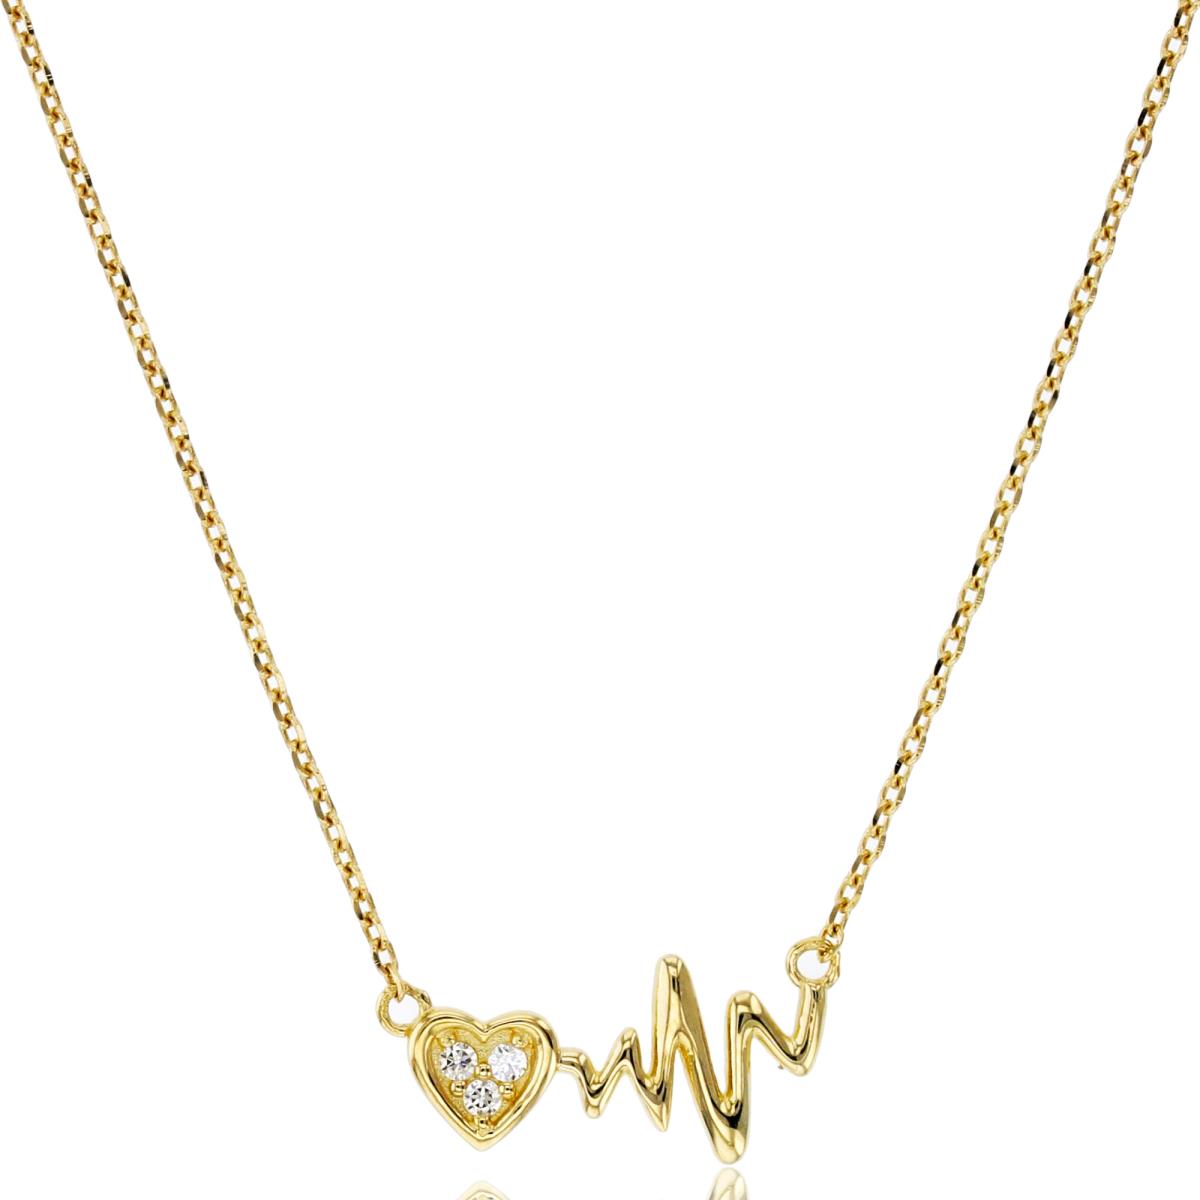 14K Yellow Gold Rnd CZ Pave Heart & Thunder 16"+2"Necklace